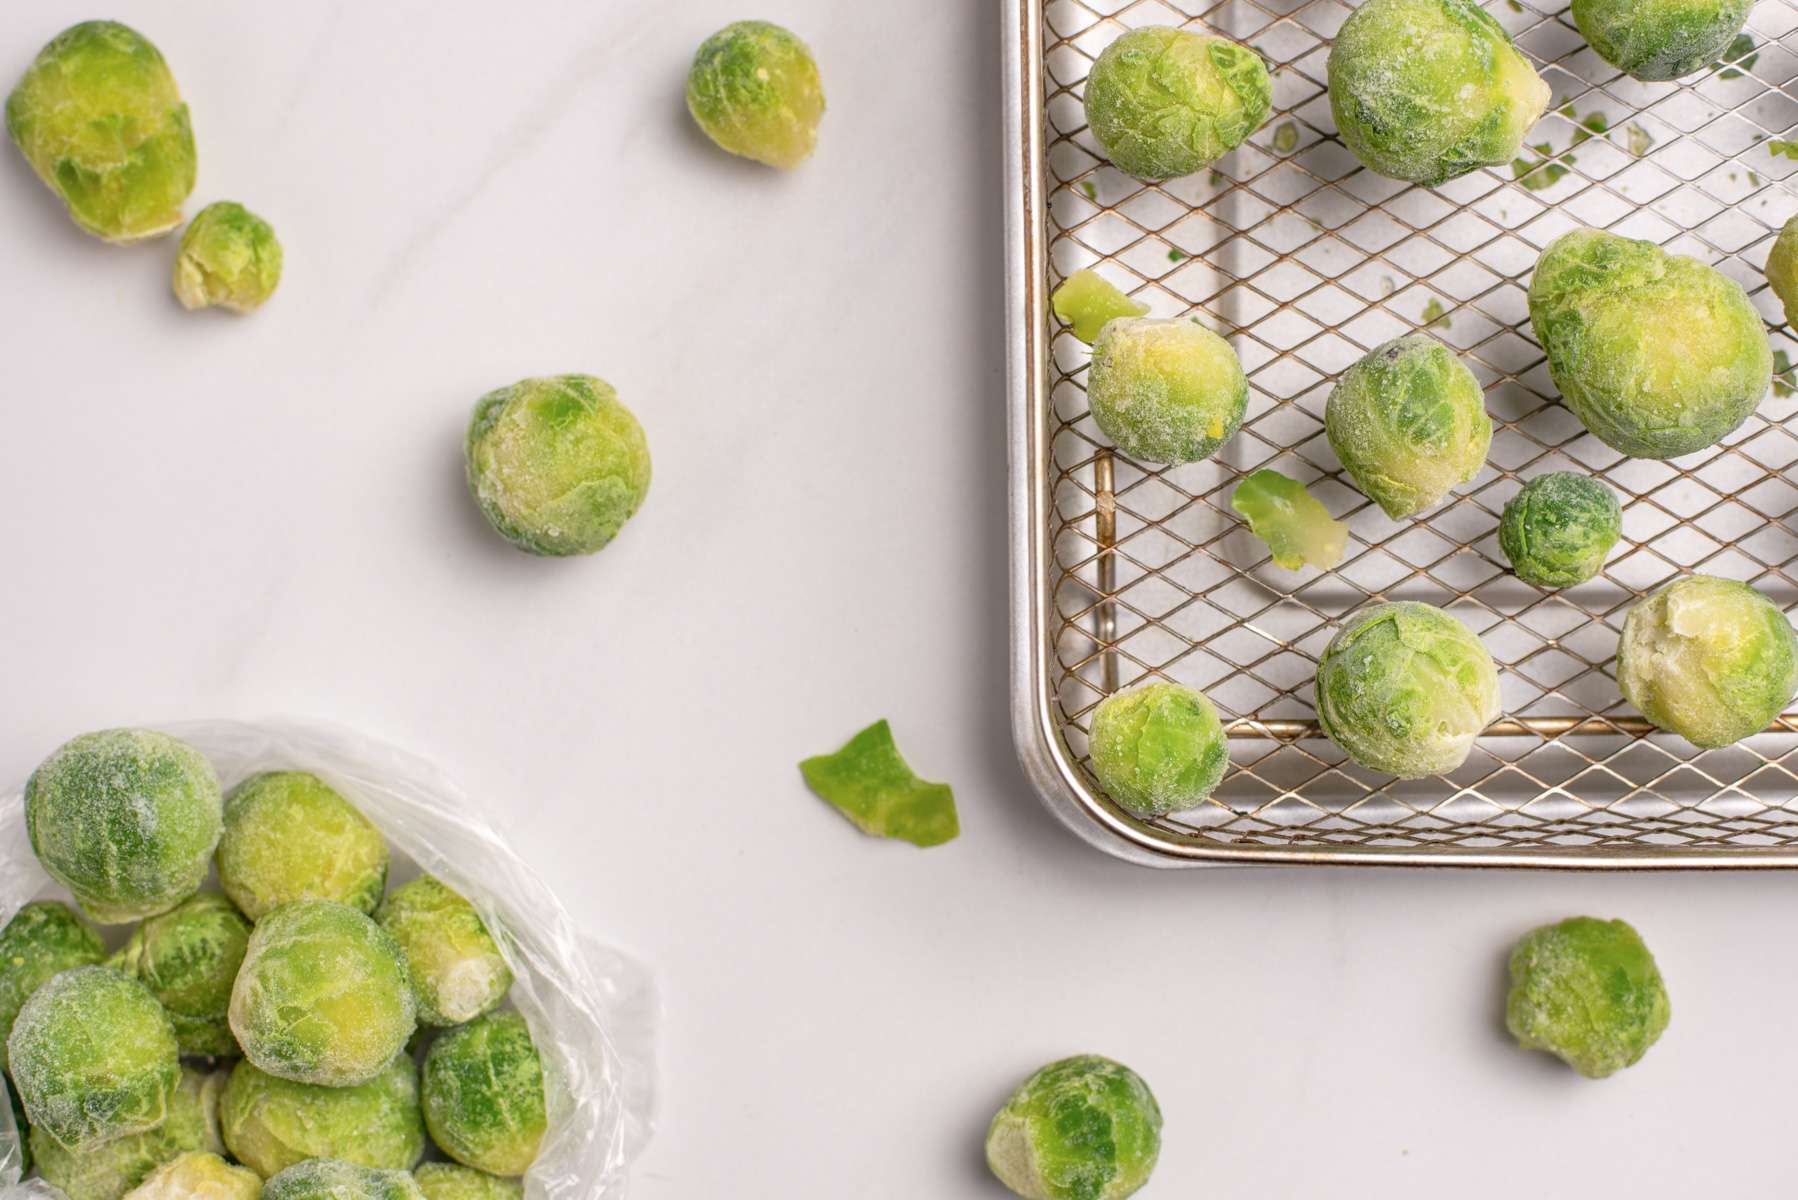 frozen brussels sprouts on air fry tray